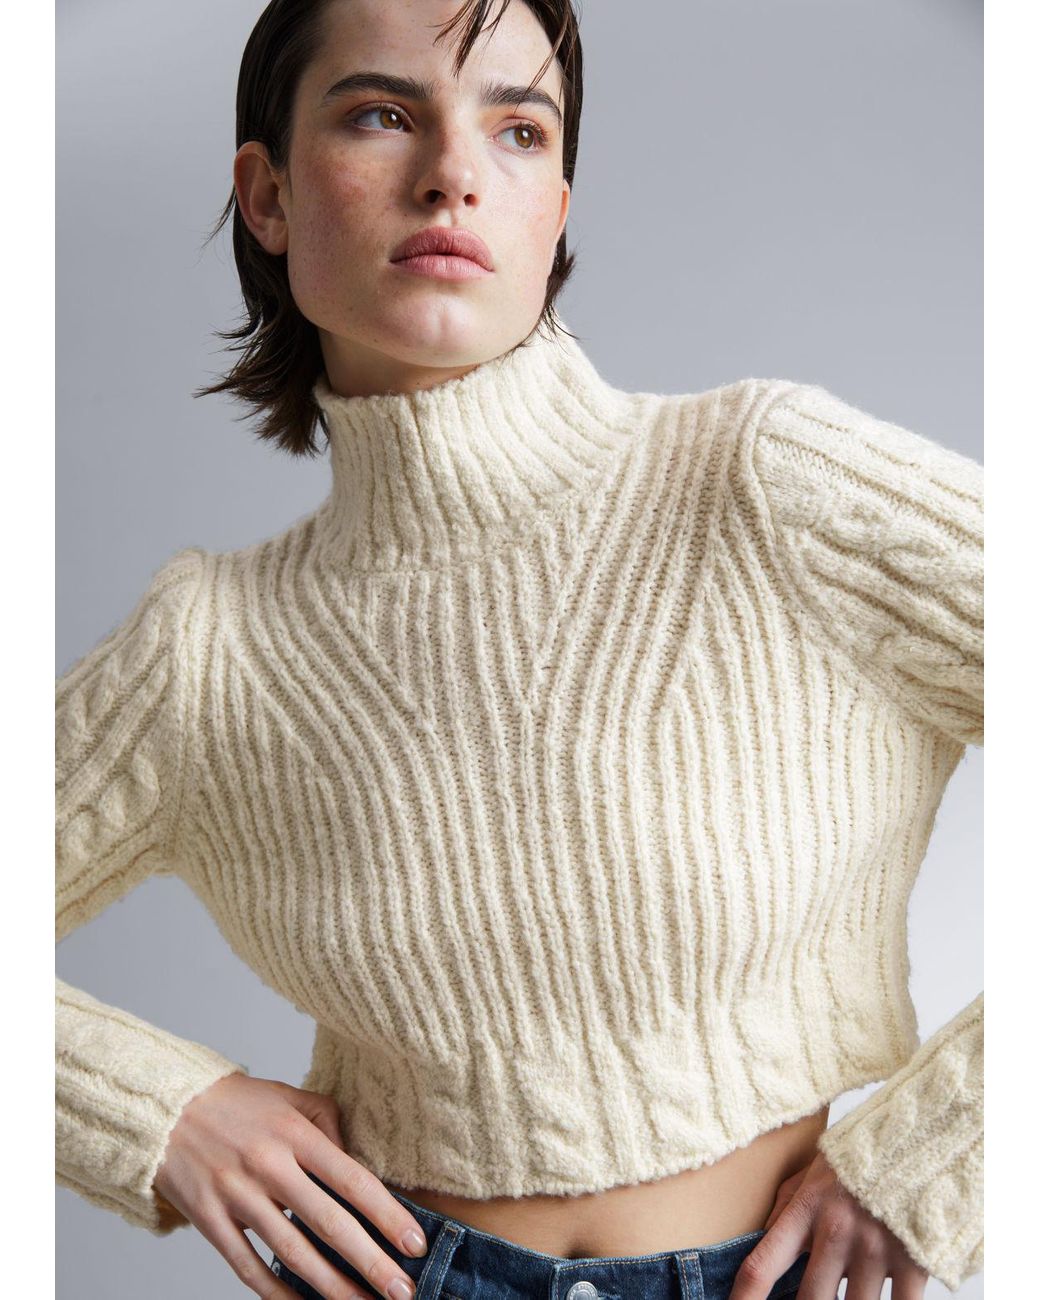 & Other Stories Cropped Cable Knit Sweater in White | Lyst